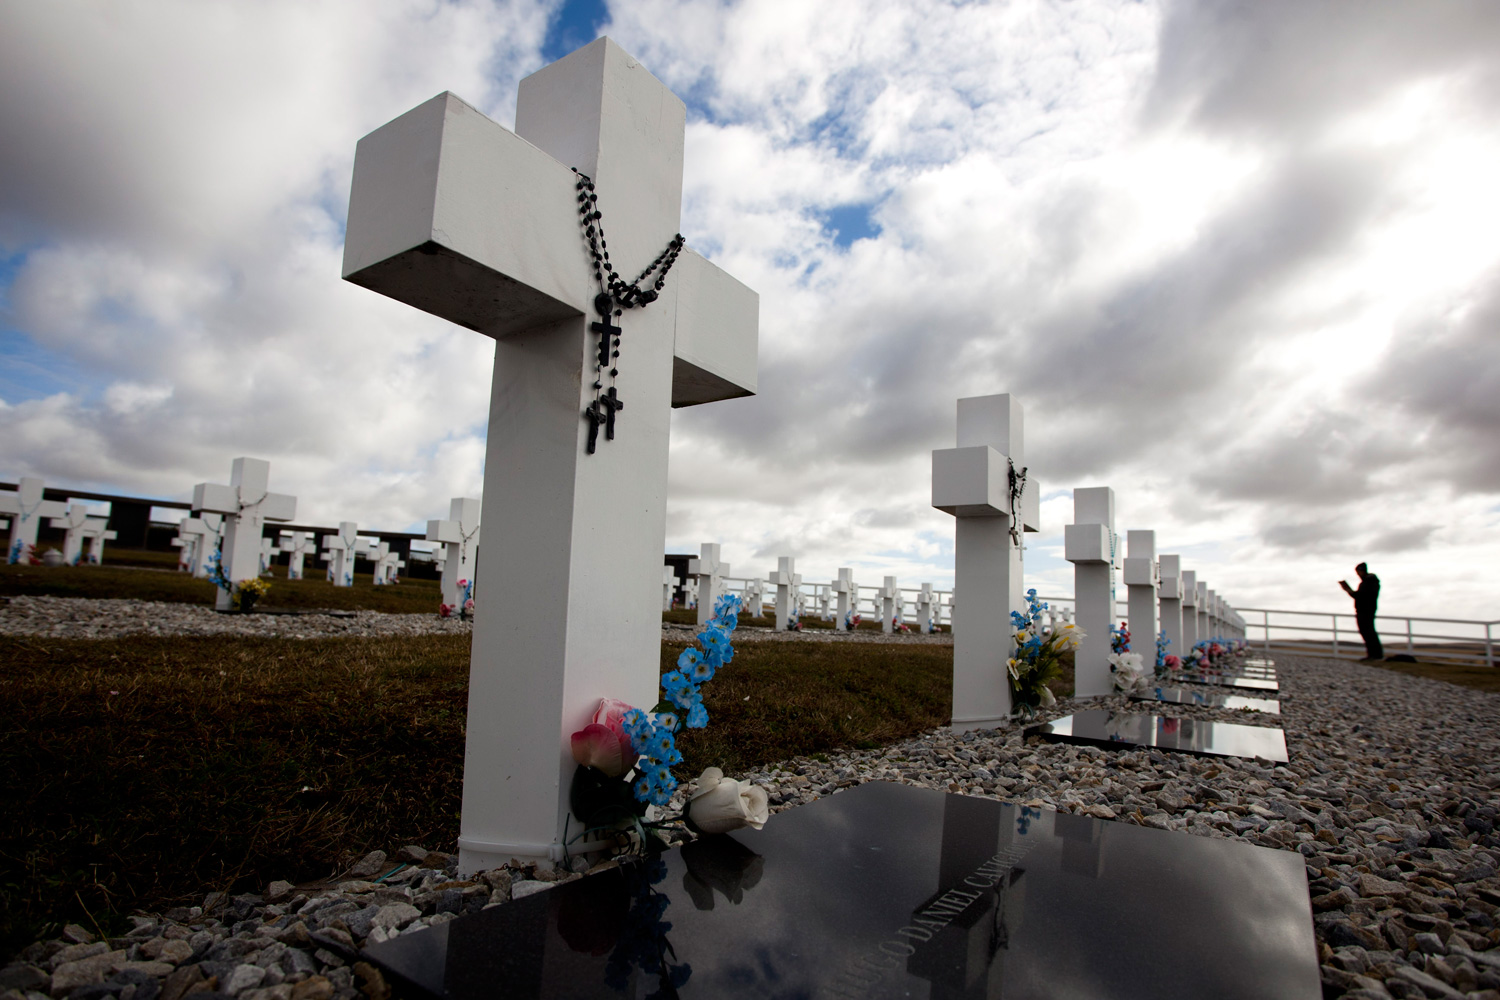 April 3, 2012.  Tombstones are seen in a cemetery for dead soldiers of Argentina from the  Malvinas War in the Falkland Islands.